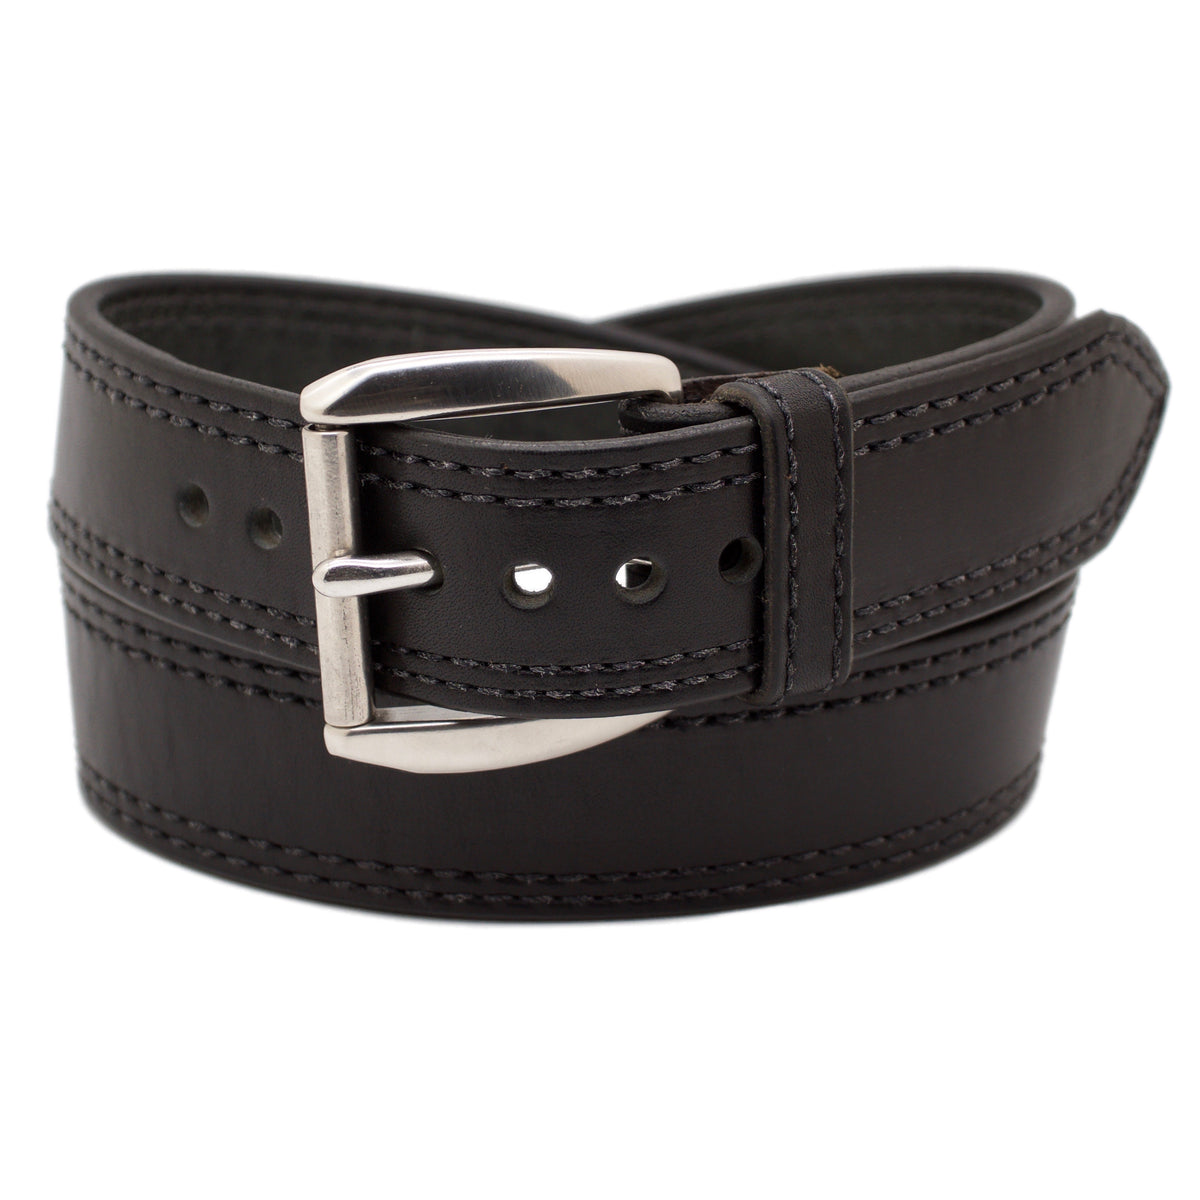 The ONYX Wide 1.75 Leather Belt